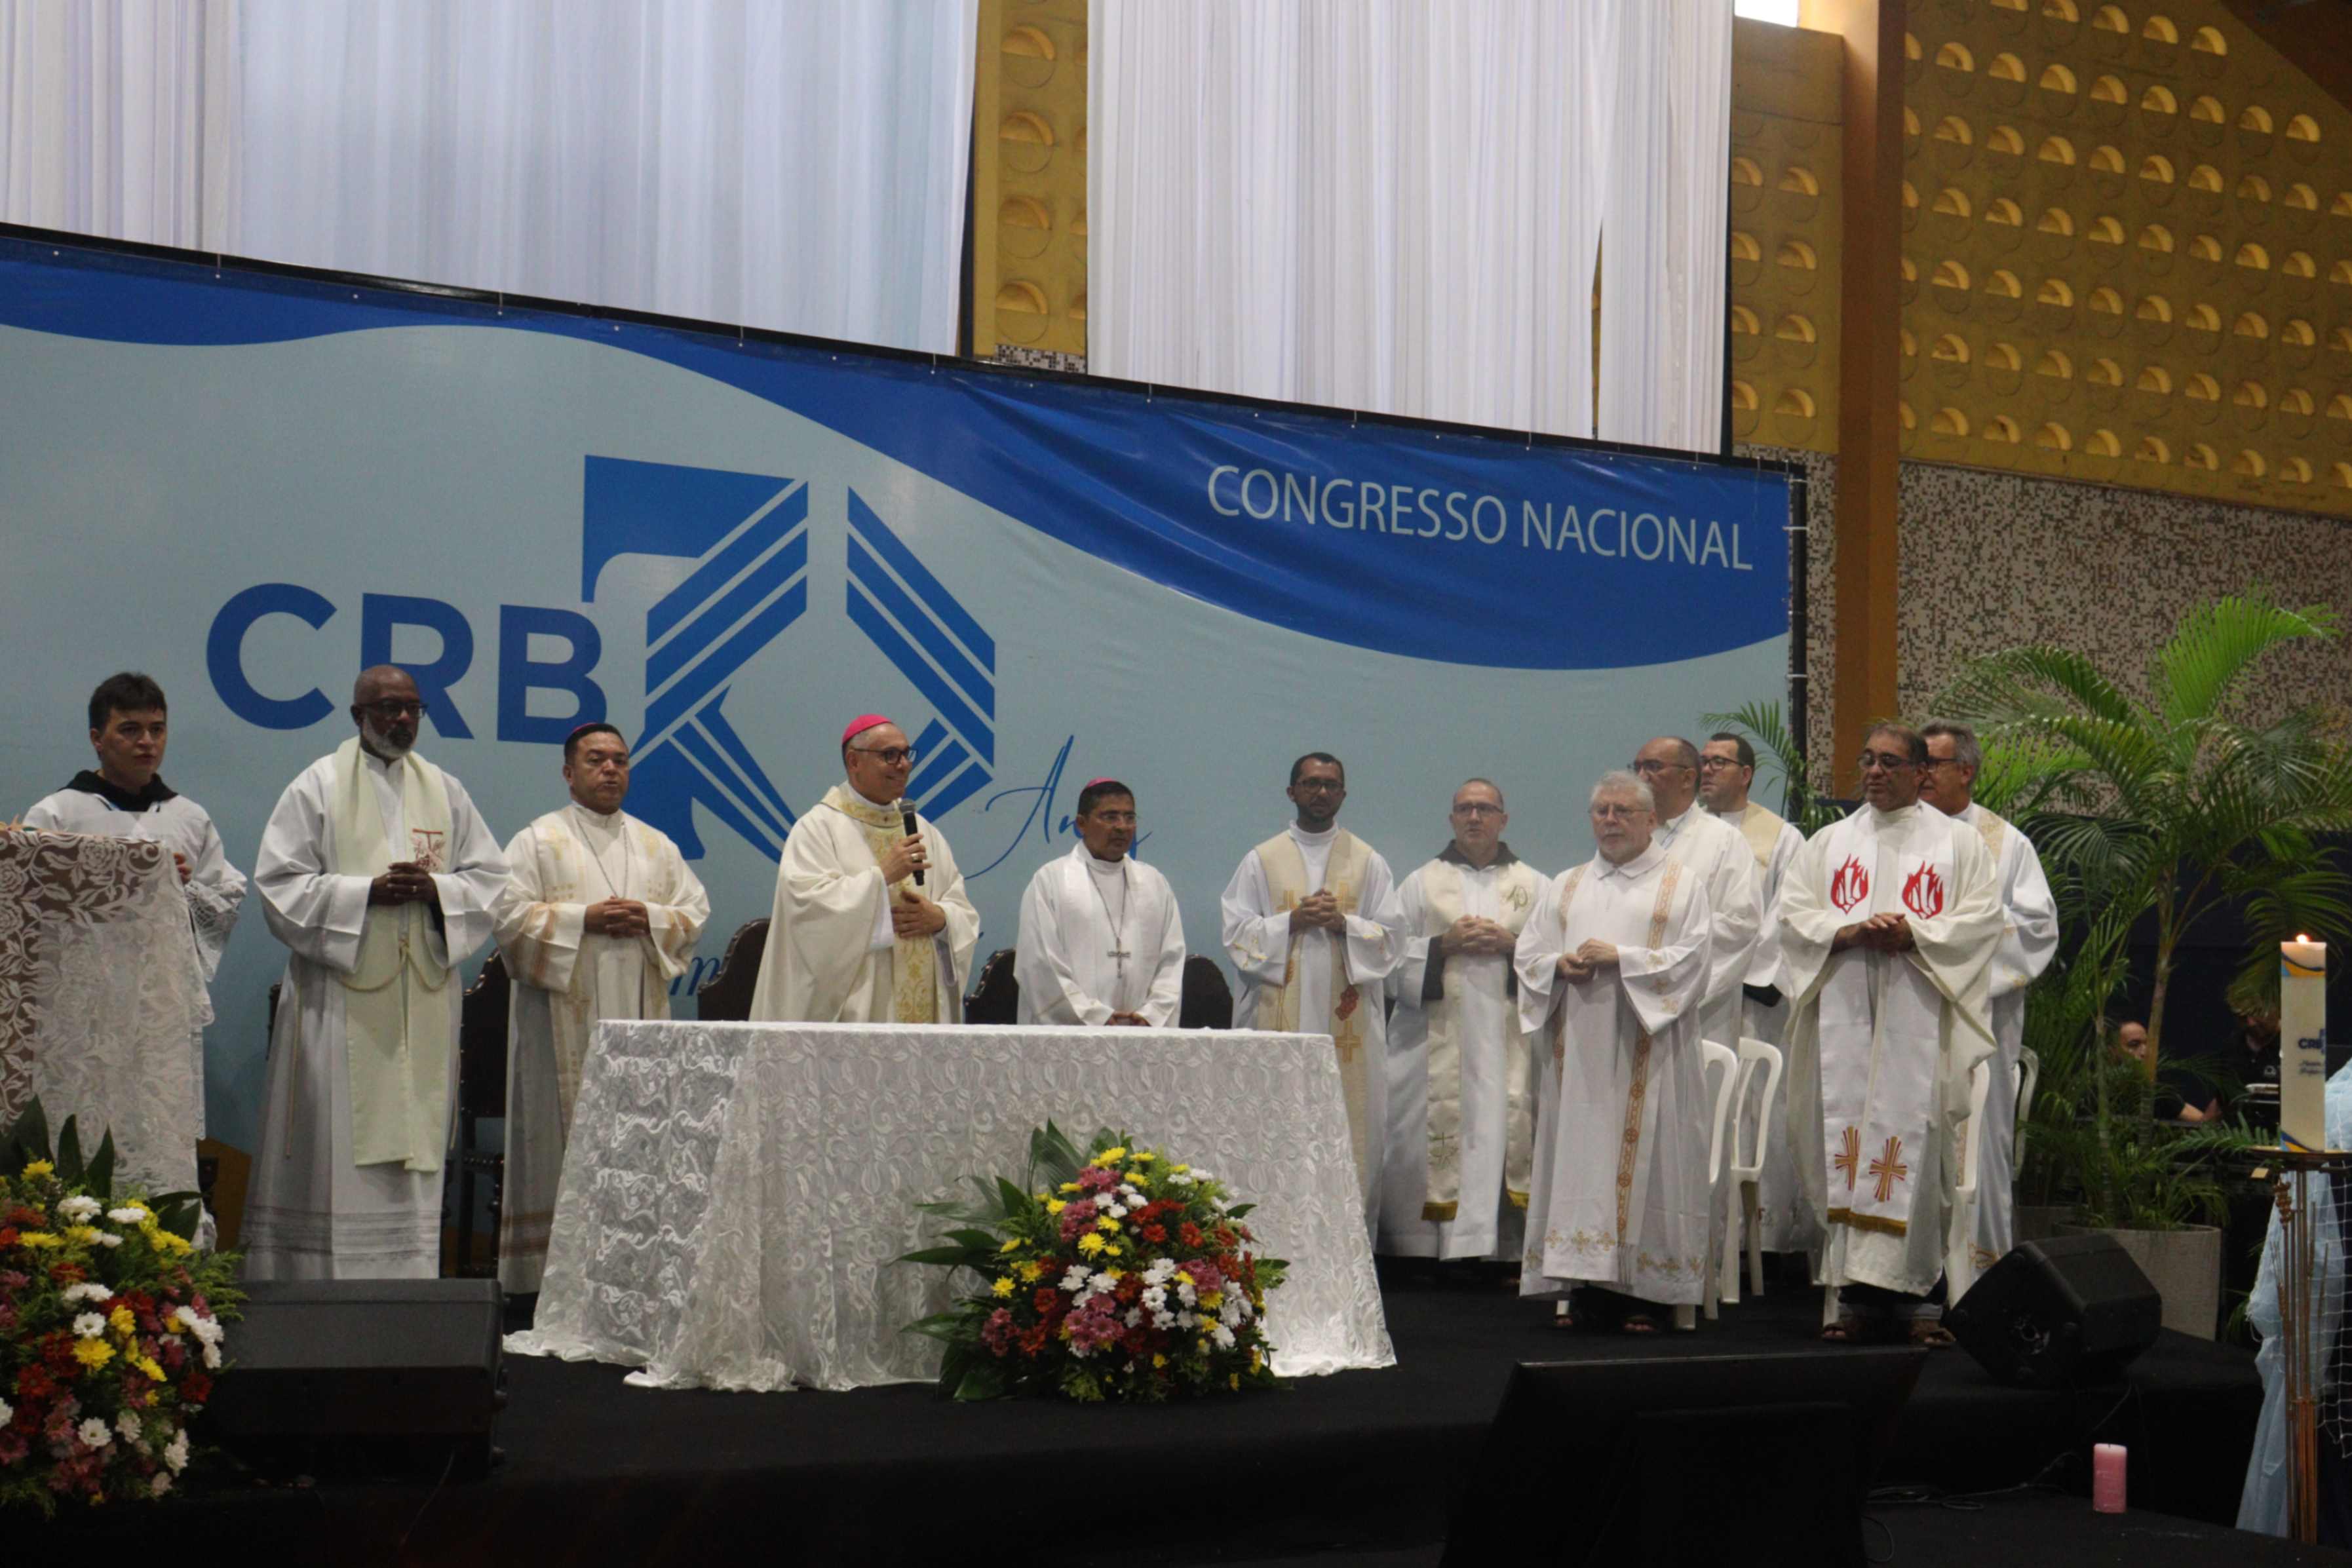 The four-day congress began with a eucharistic celebration, presided over by Bishop Gregório Paixão, the archbishop of Fortaleza and president of the Episcopal Commission for Culture and Education of Brazil's National Bishops Conference. (Courtesy of CRB)